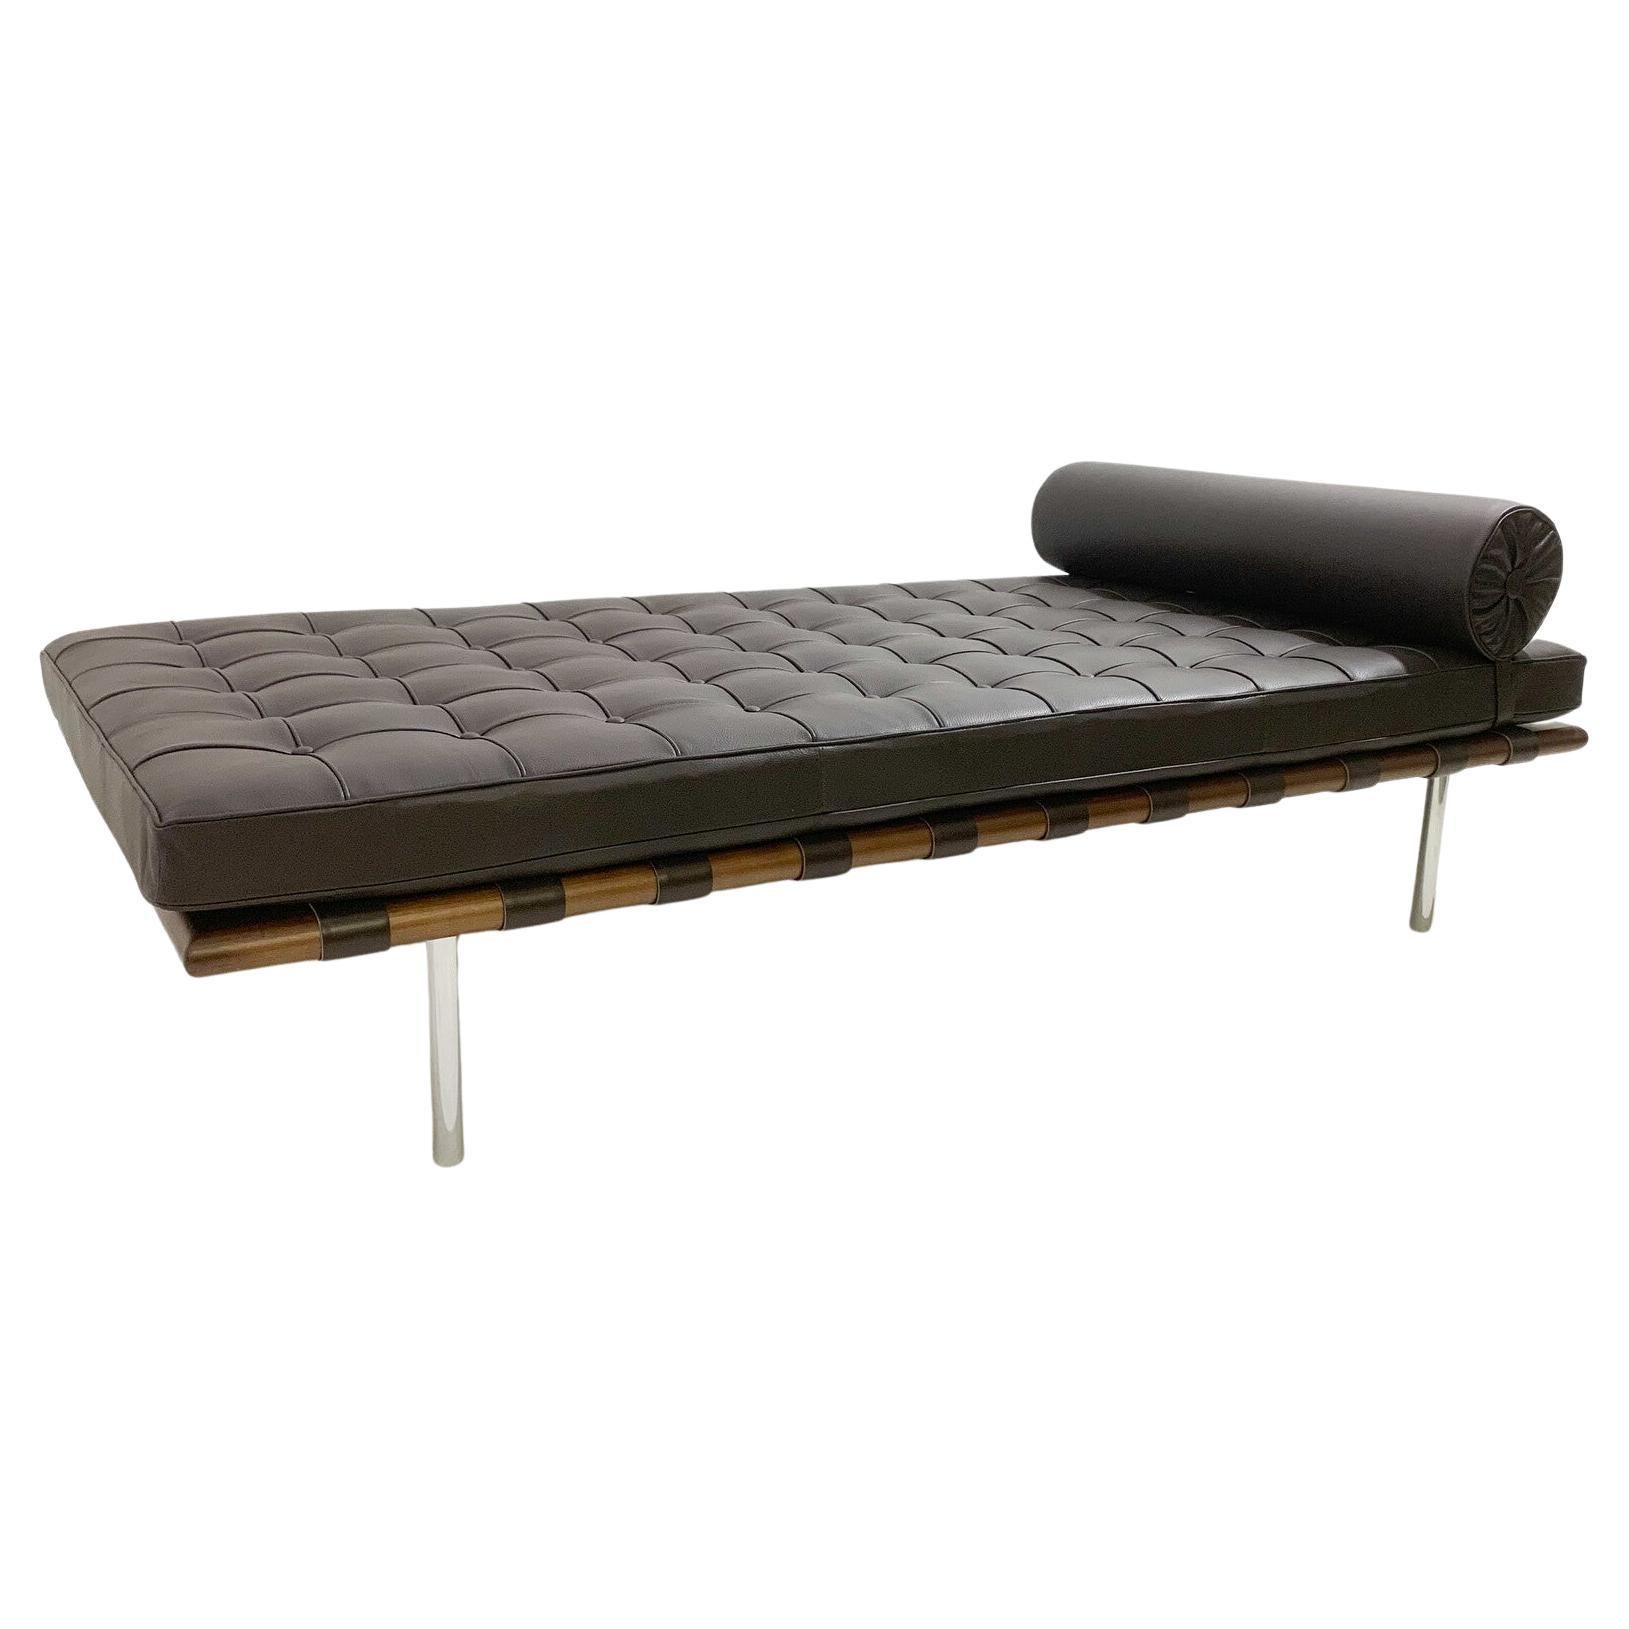 Barcelona Daybed by Ludwig Mies van der Rohe for Knoll, Black Leather, 1990s